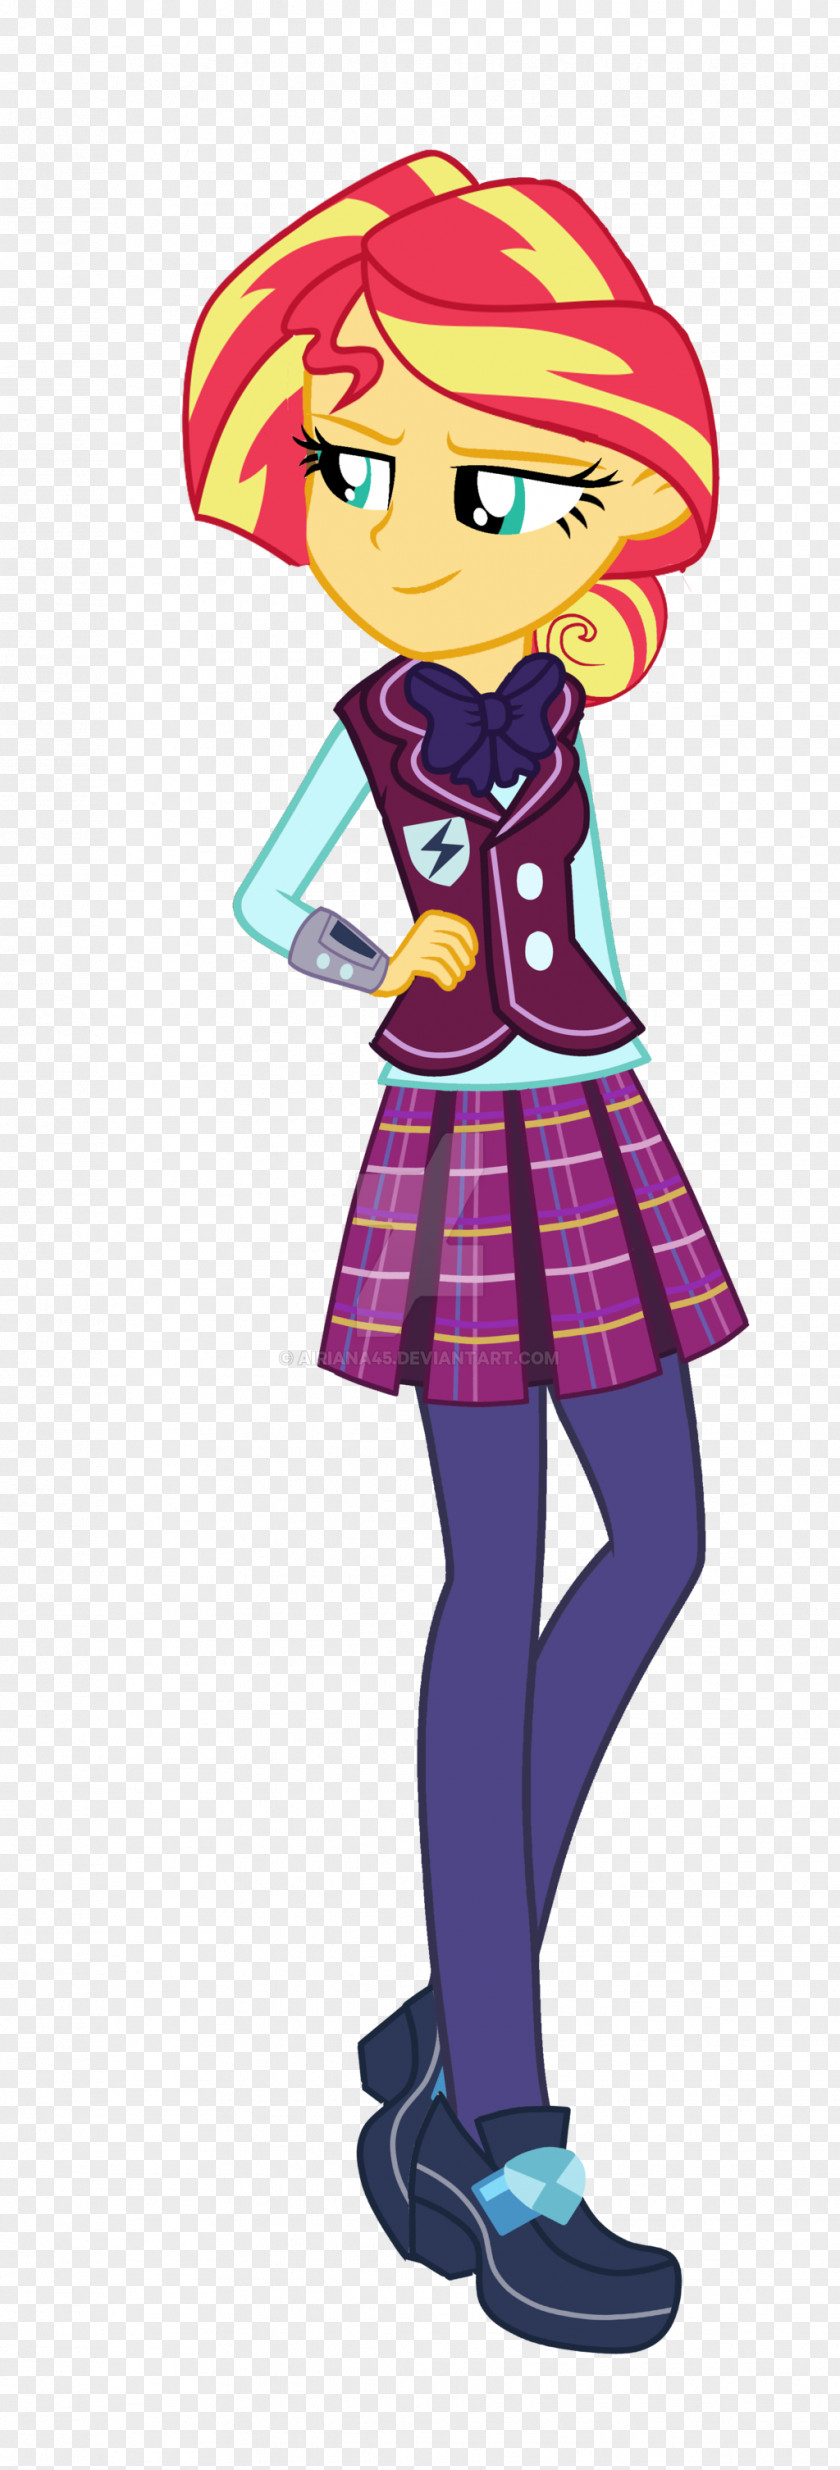 My Little Pony Equestria Girls Sunset Shimmer Costume Design Clothing Accessories Fashion Clip Art PNG